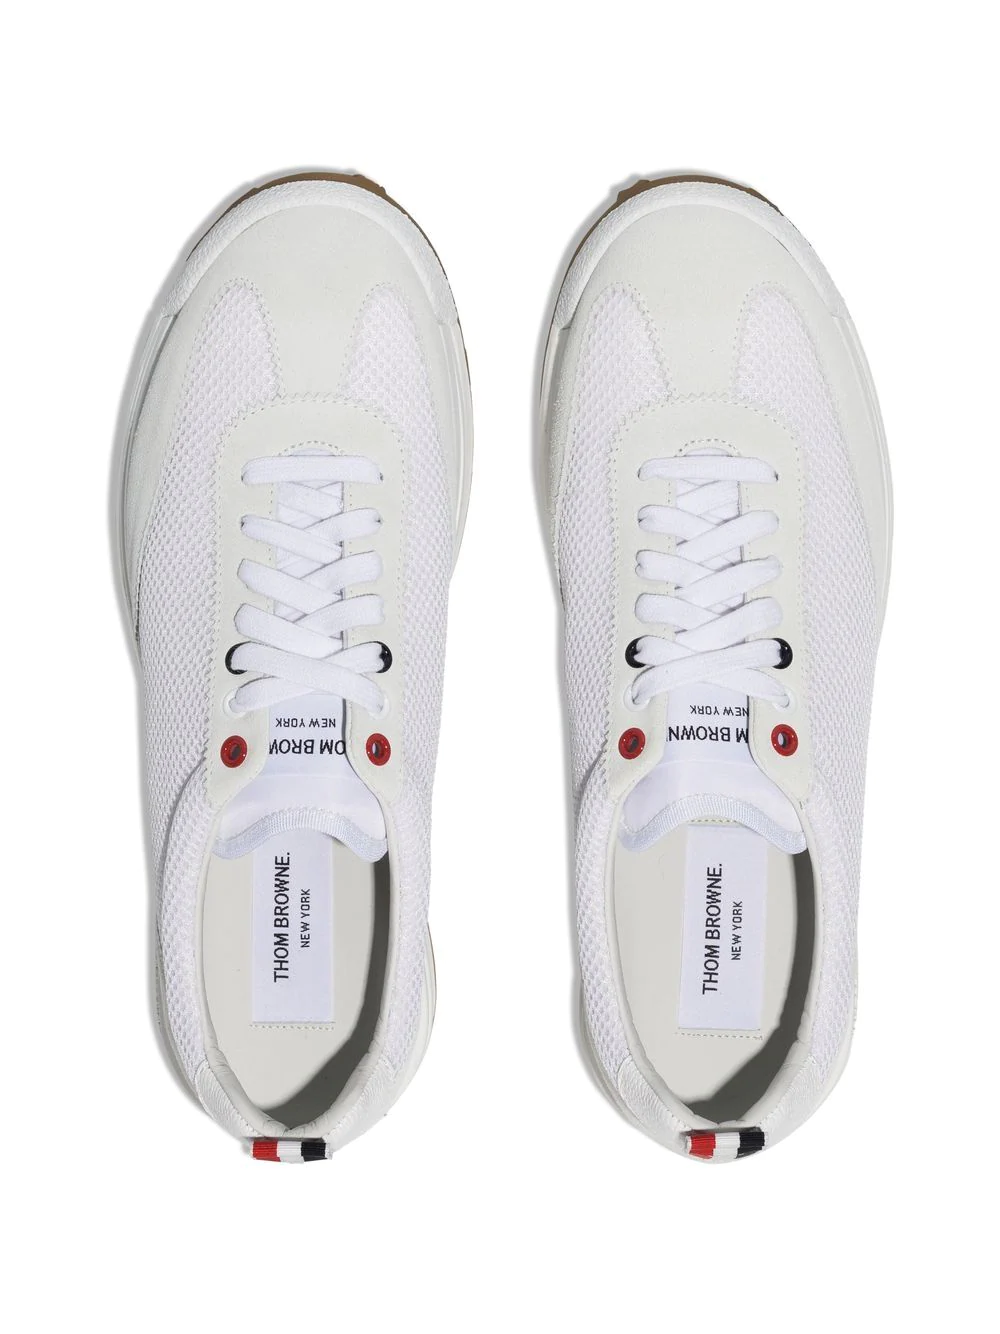     Thom-Browne-Mens-Casual-Sporty-Sneaker-White-3